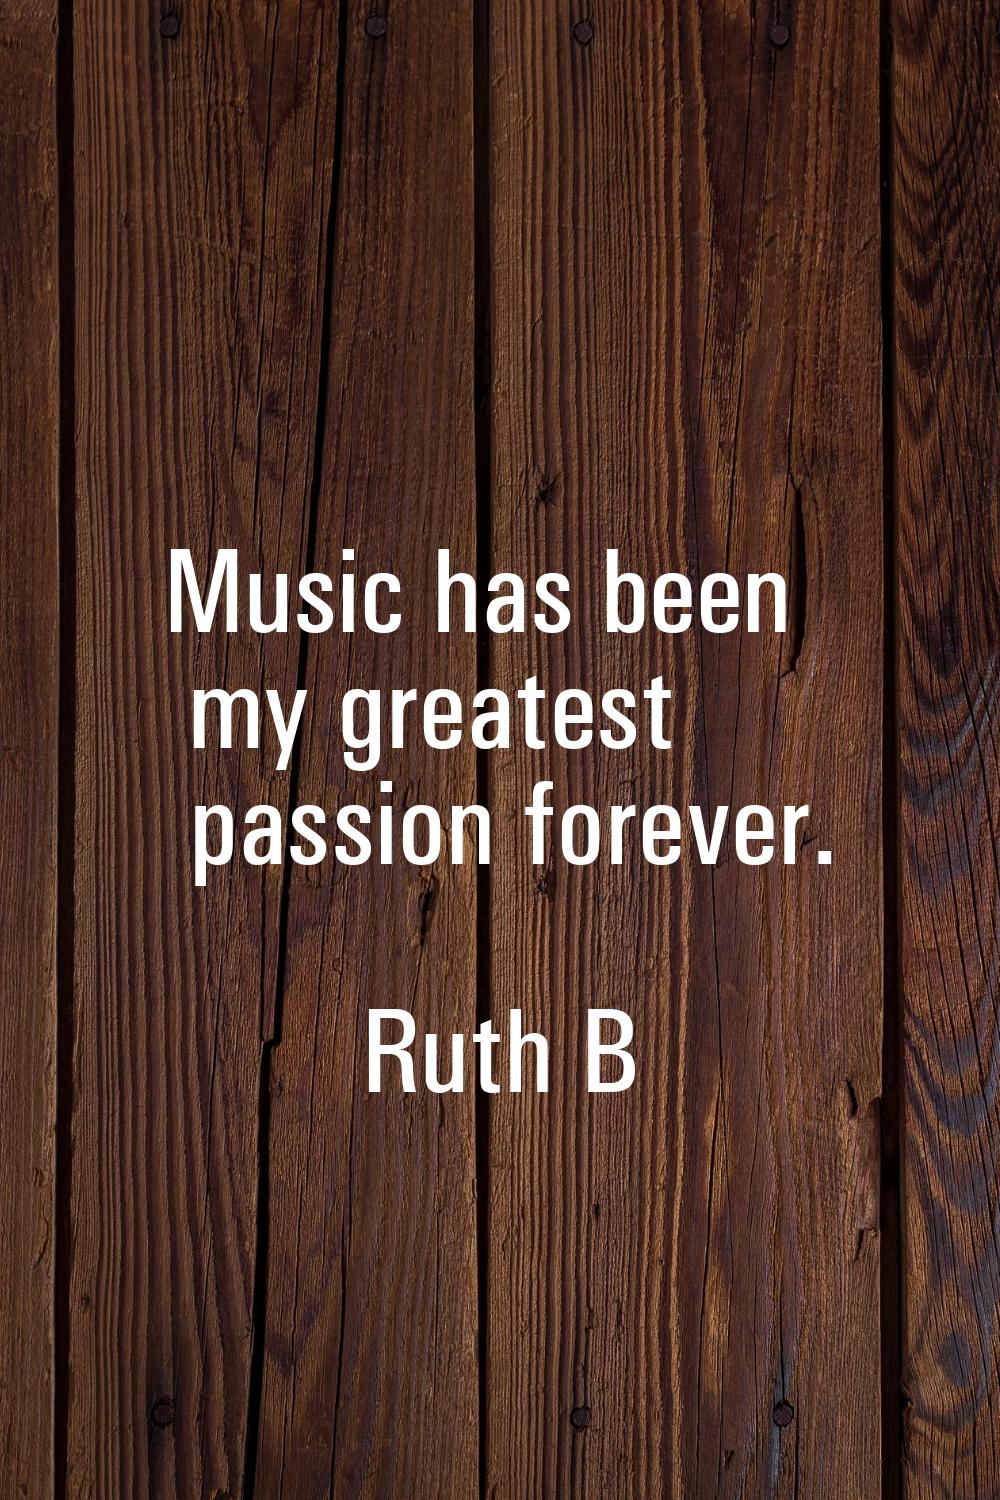 Music has been my greatest passion forever.